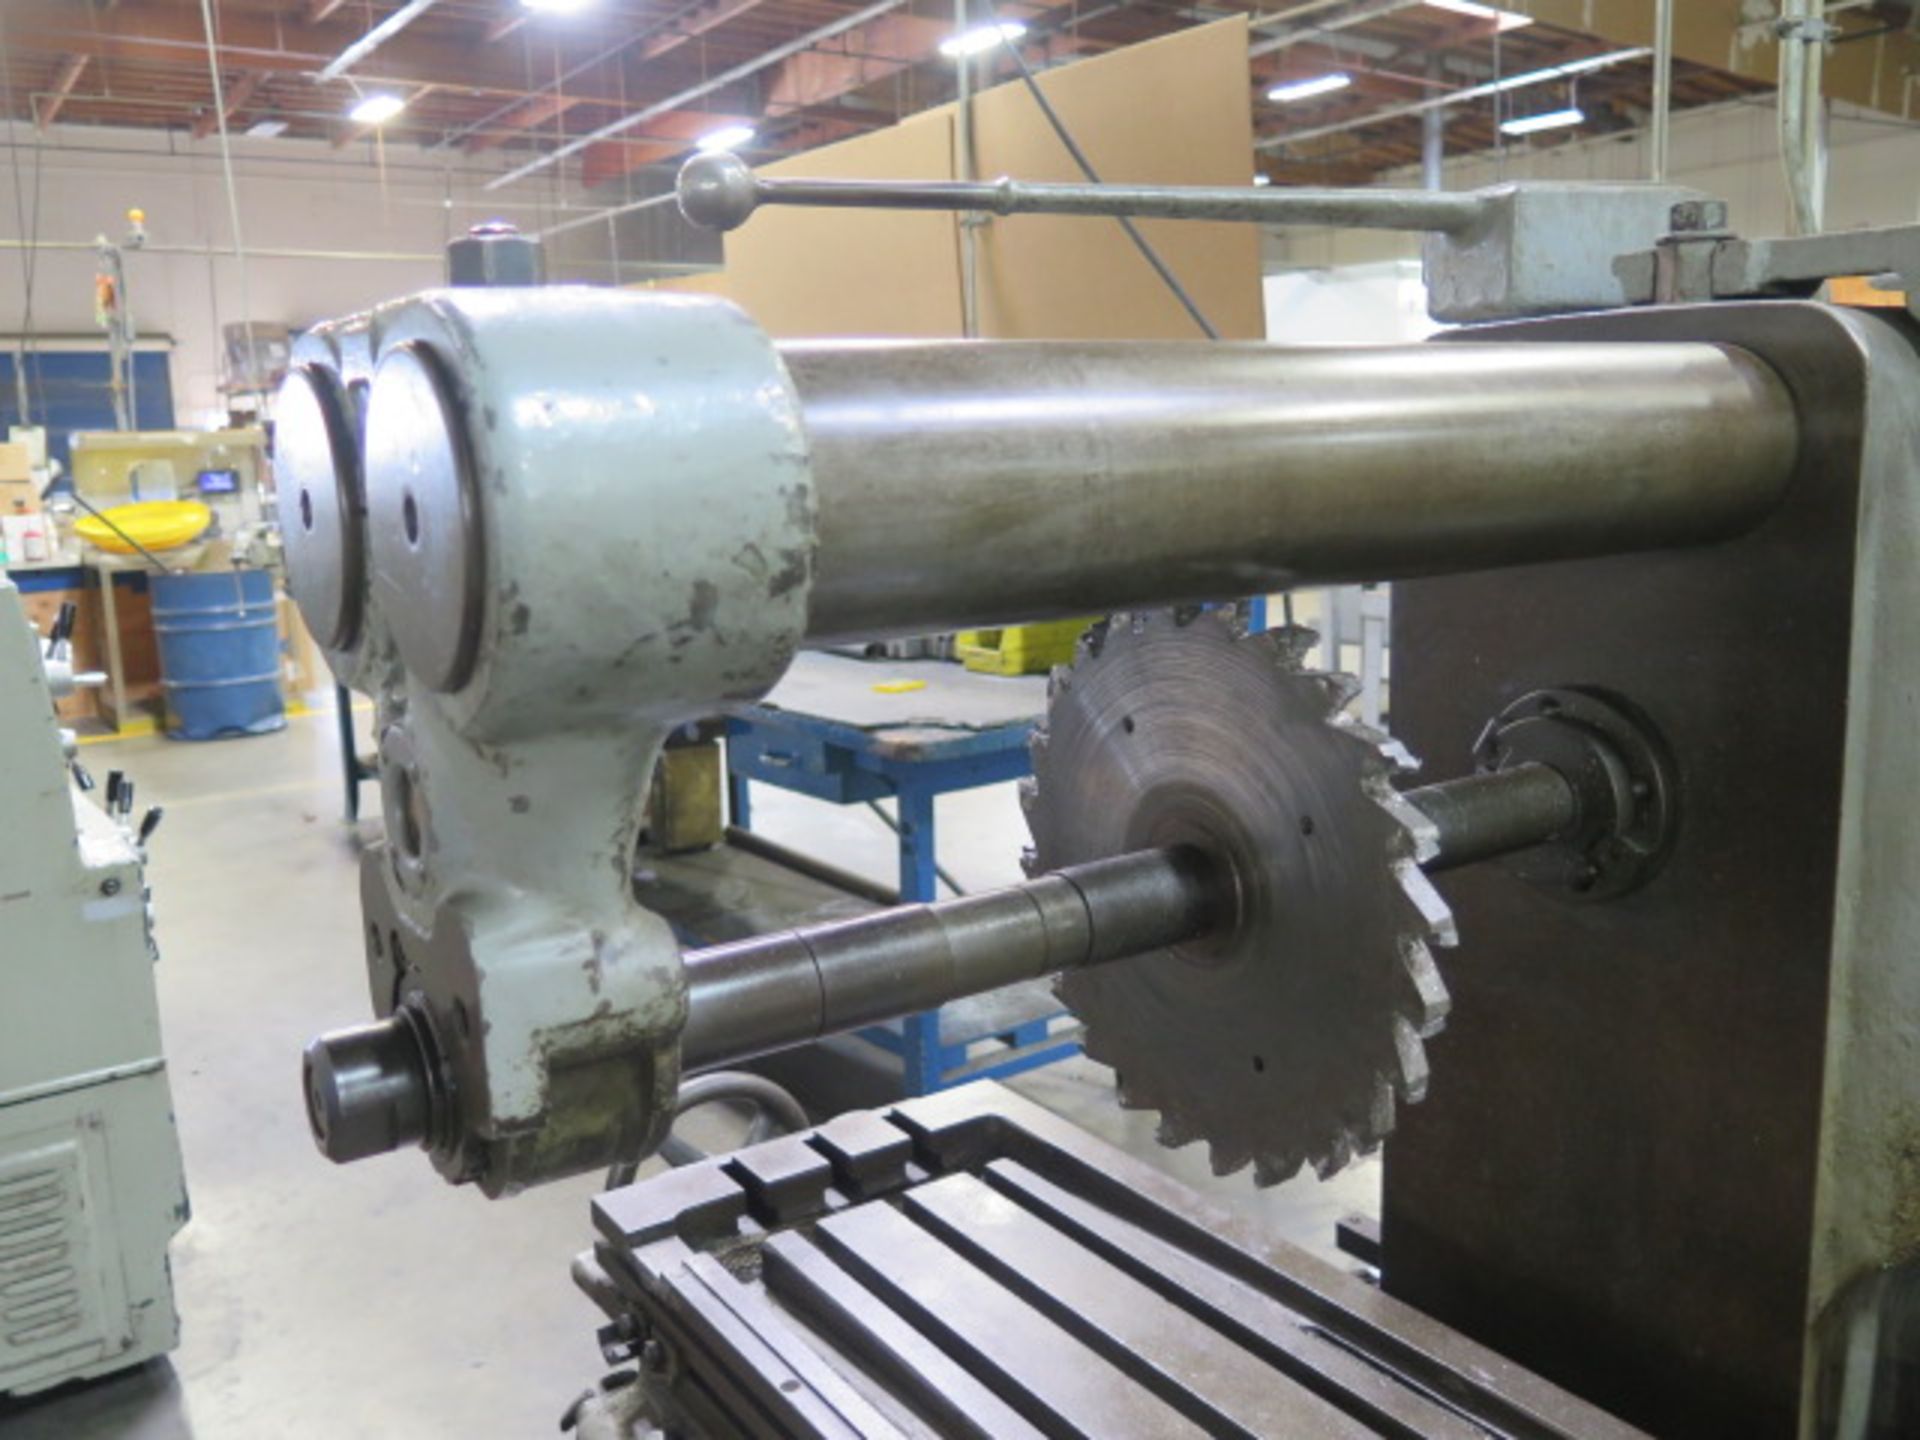 Kearney & Trecker Milwaukee Horizontal Mill s/n 27-7136 w/ 15-1500 RPM, 50-Taper Spindle, SOLD AS IS - Image 4 of 7